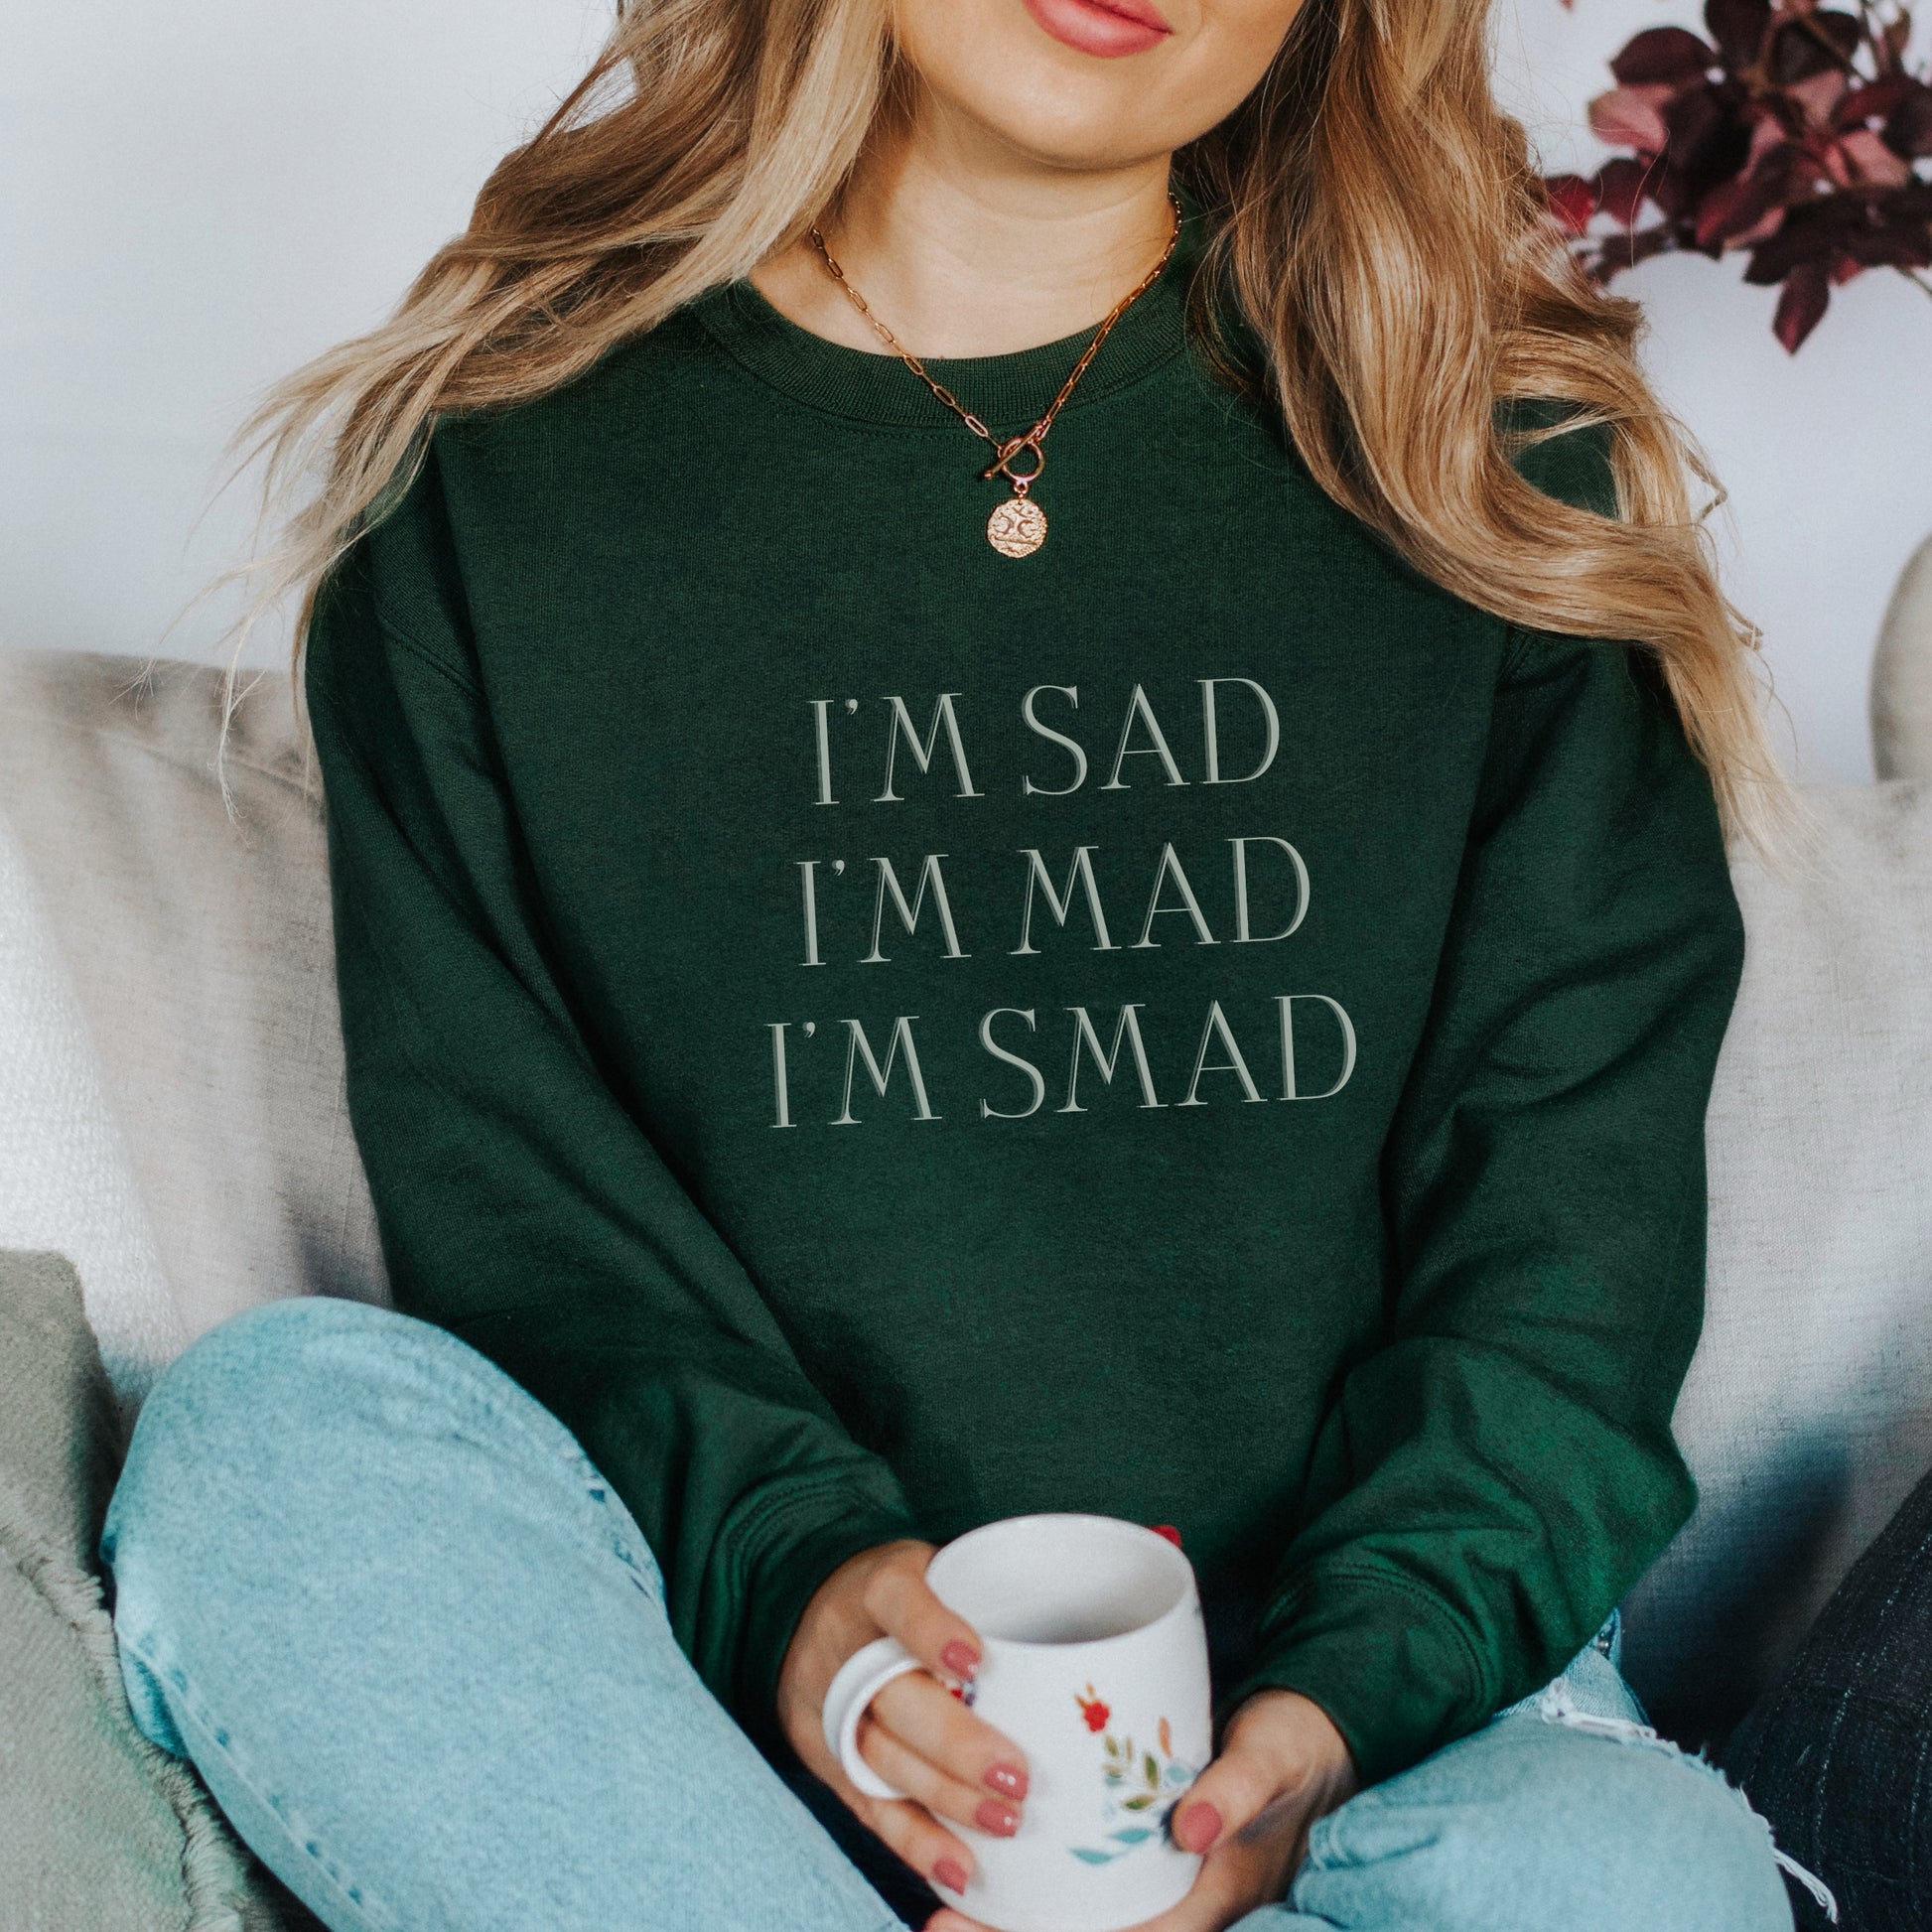 The front of the sweatshirt proudly displays the phrase "I’m Sad. I’m Mad. I’m Smad." in a bold and eye-catching font. The design is not just a fashion statement; it's a conversation starter that promotes mental health awareness and destigmatizes the spectrum of feelings we all experience.